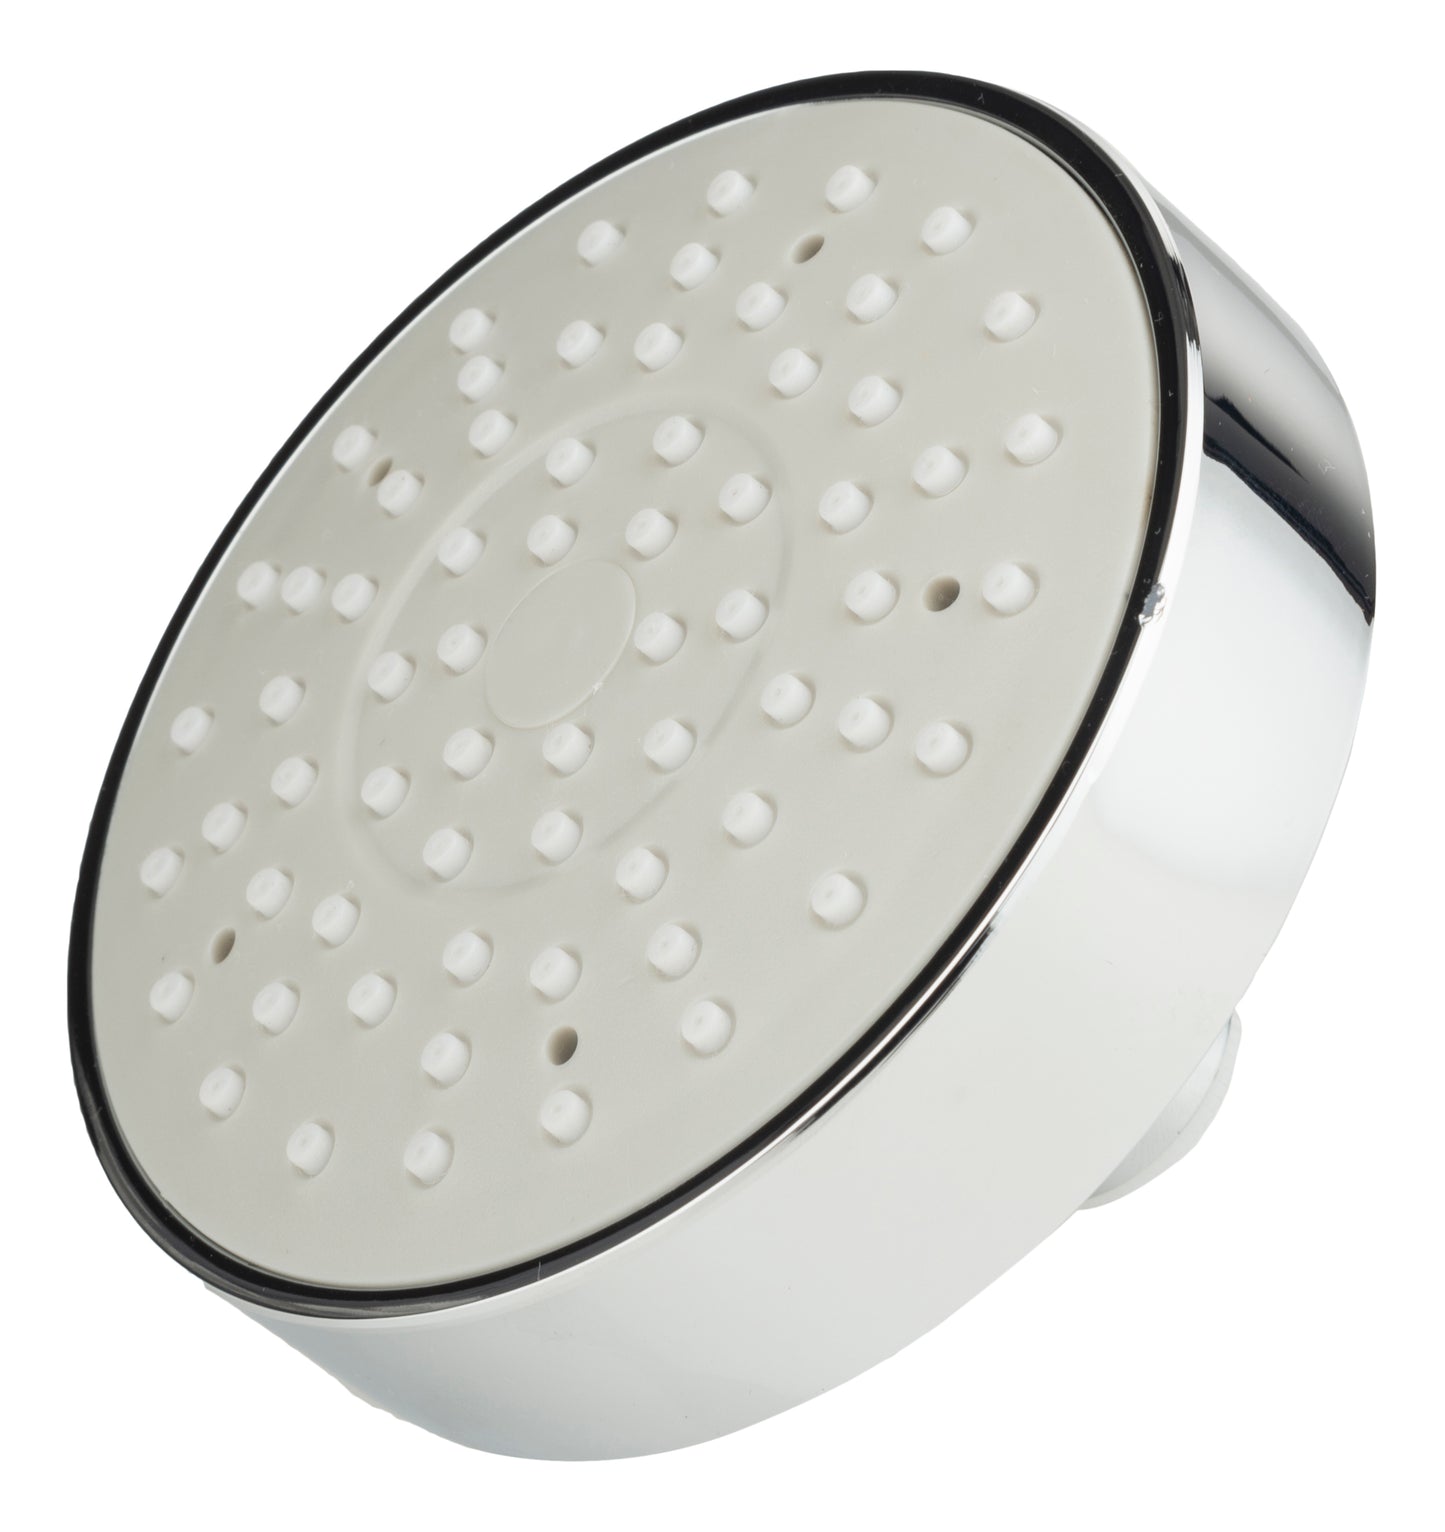 SSF-15 Shower with shower filter | Complete bath set | Protect from hard water